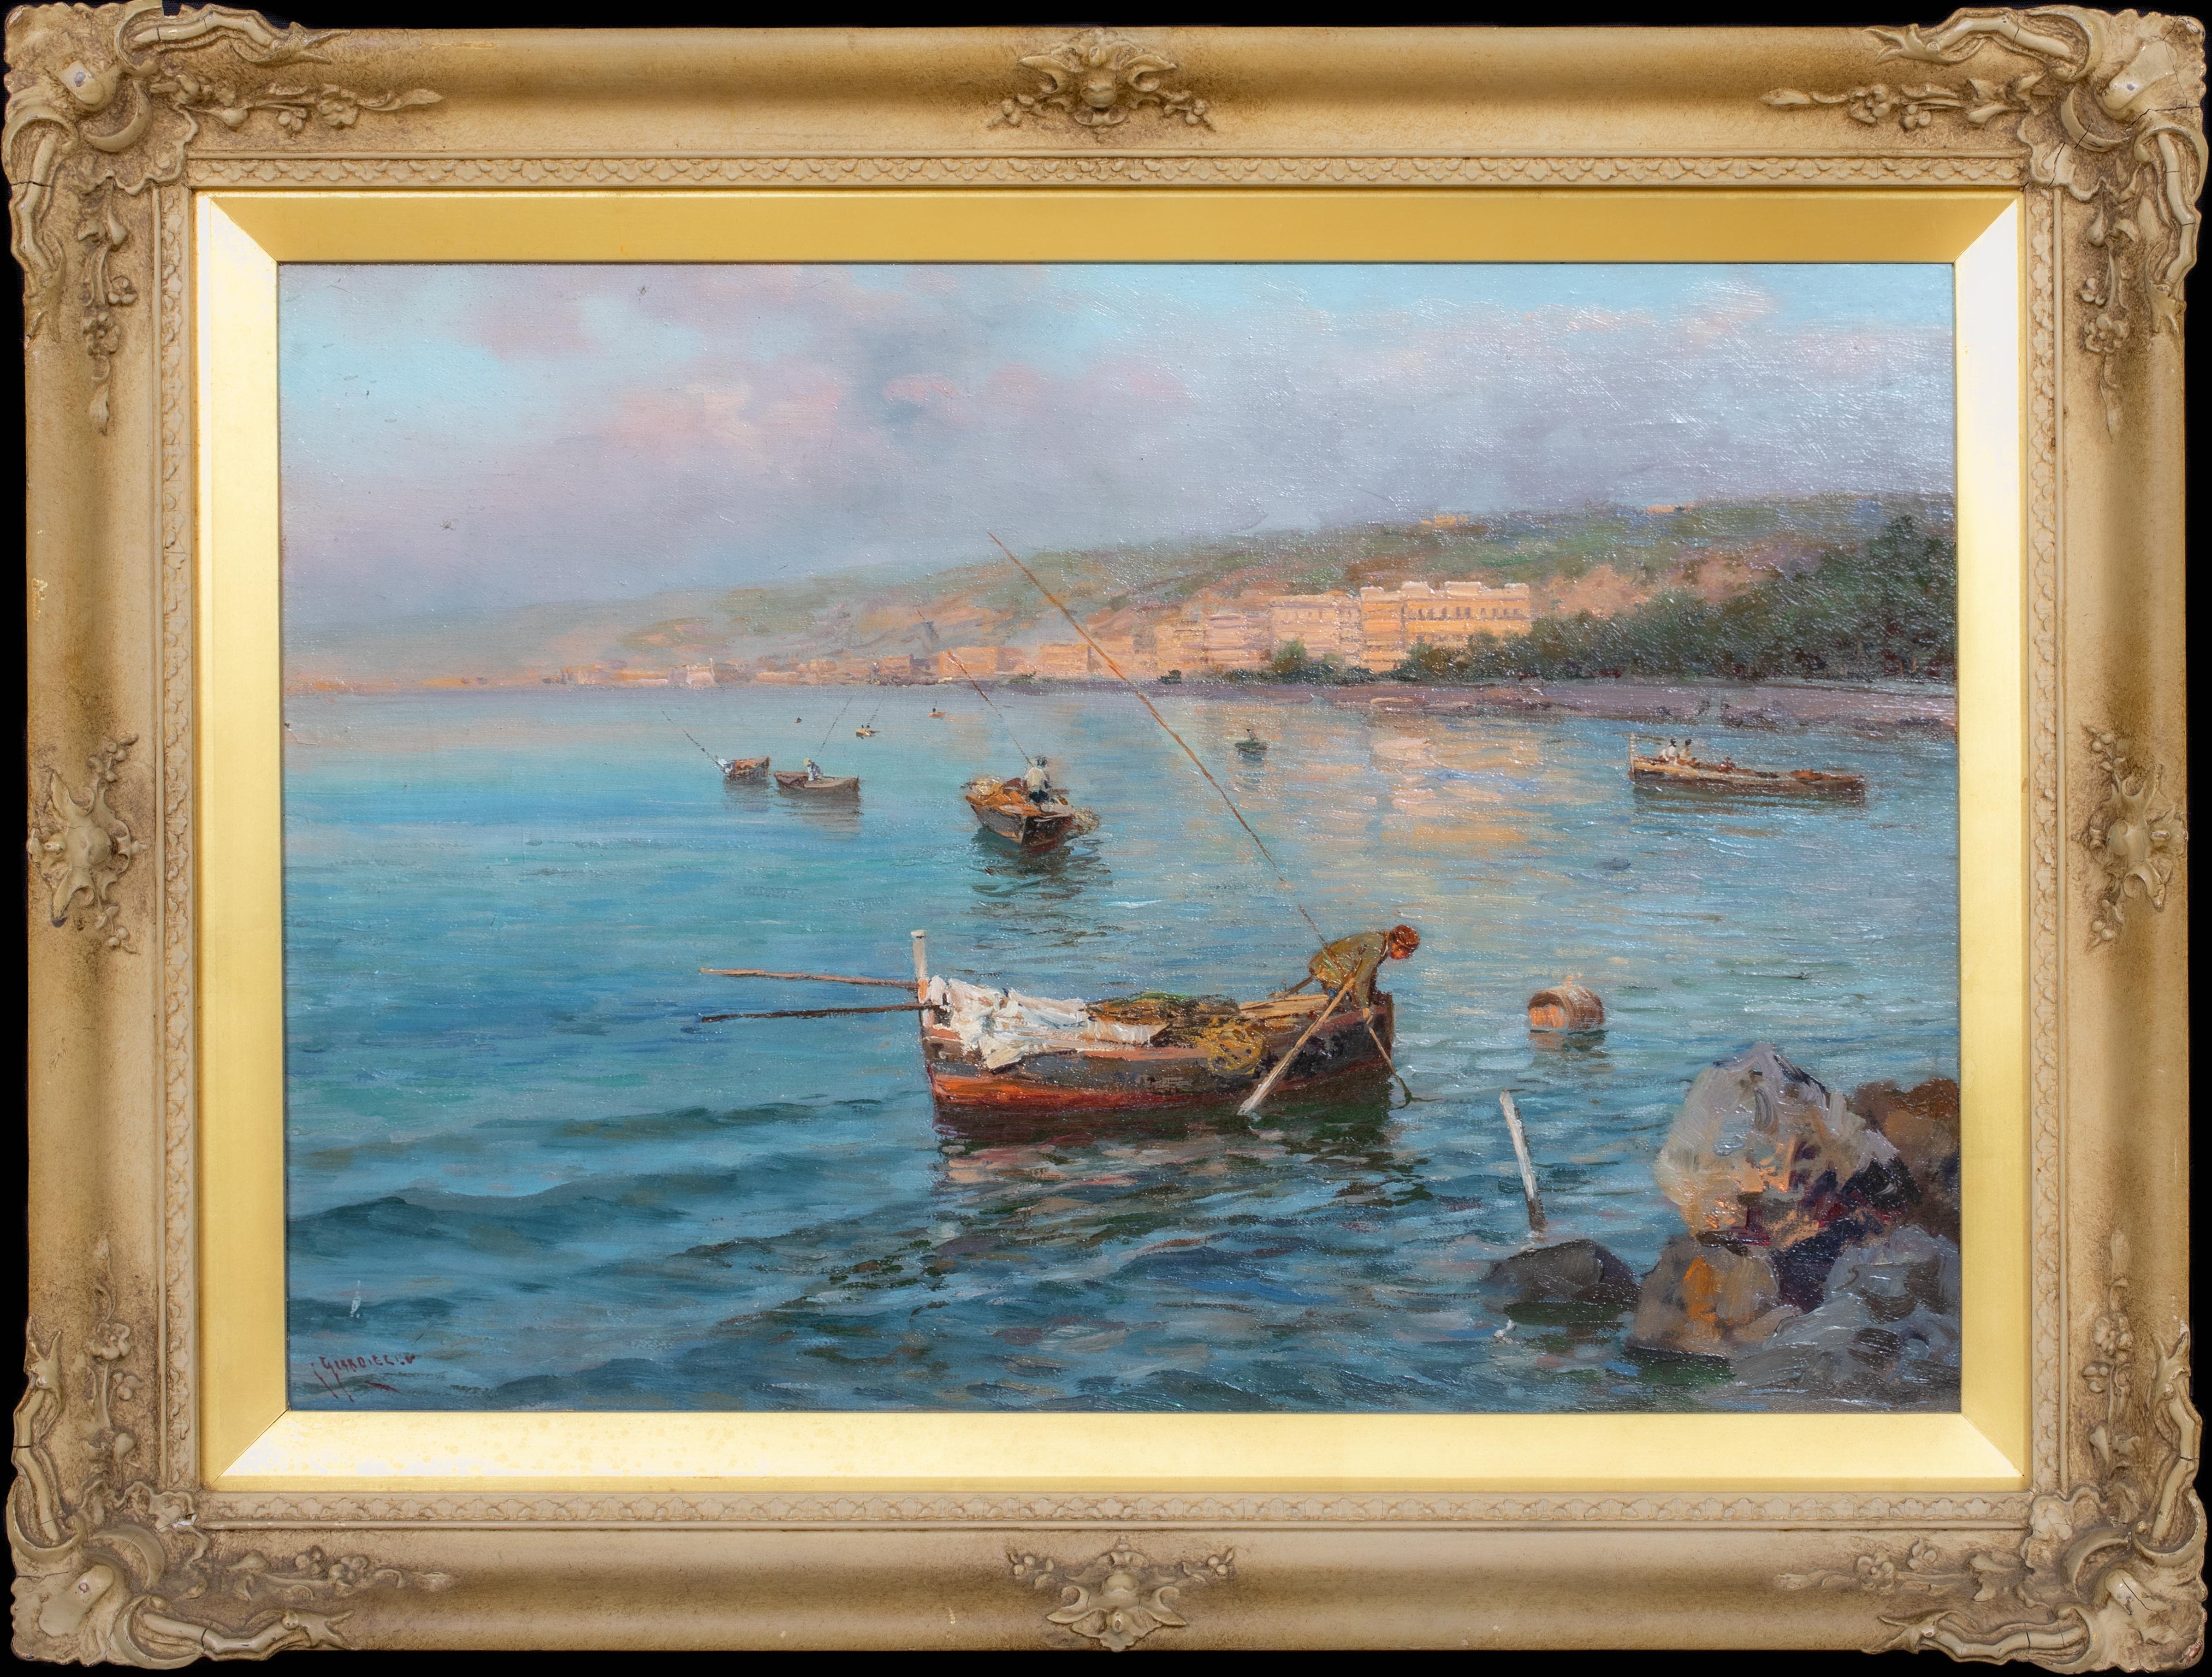 Unknown Landscape Painting - Fishing Off The Bay Of Naples  by GUISEPPE GIARDIELLO (1877-1920)